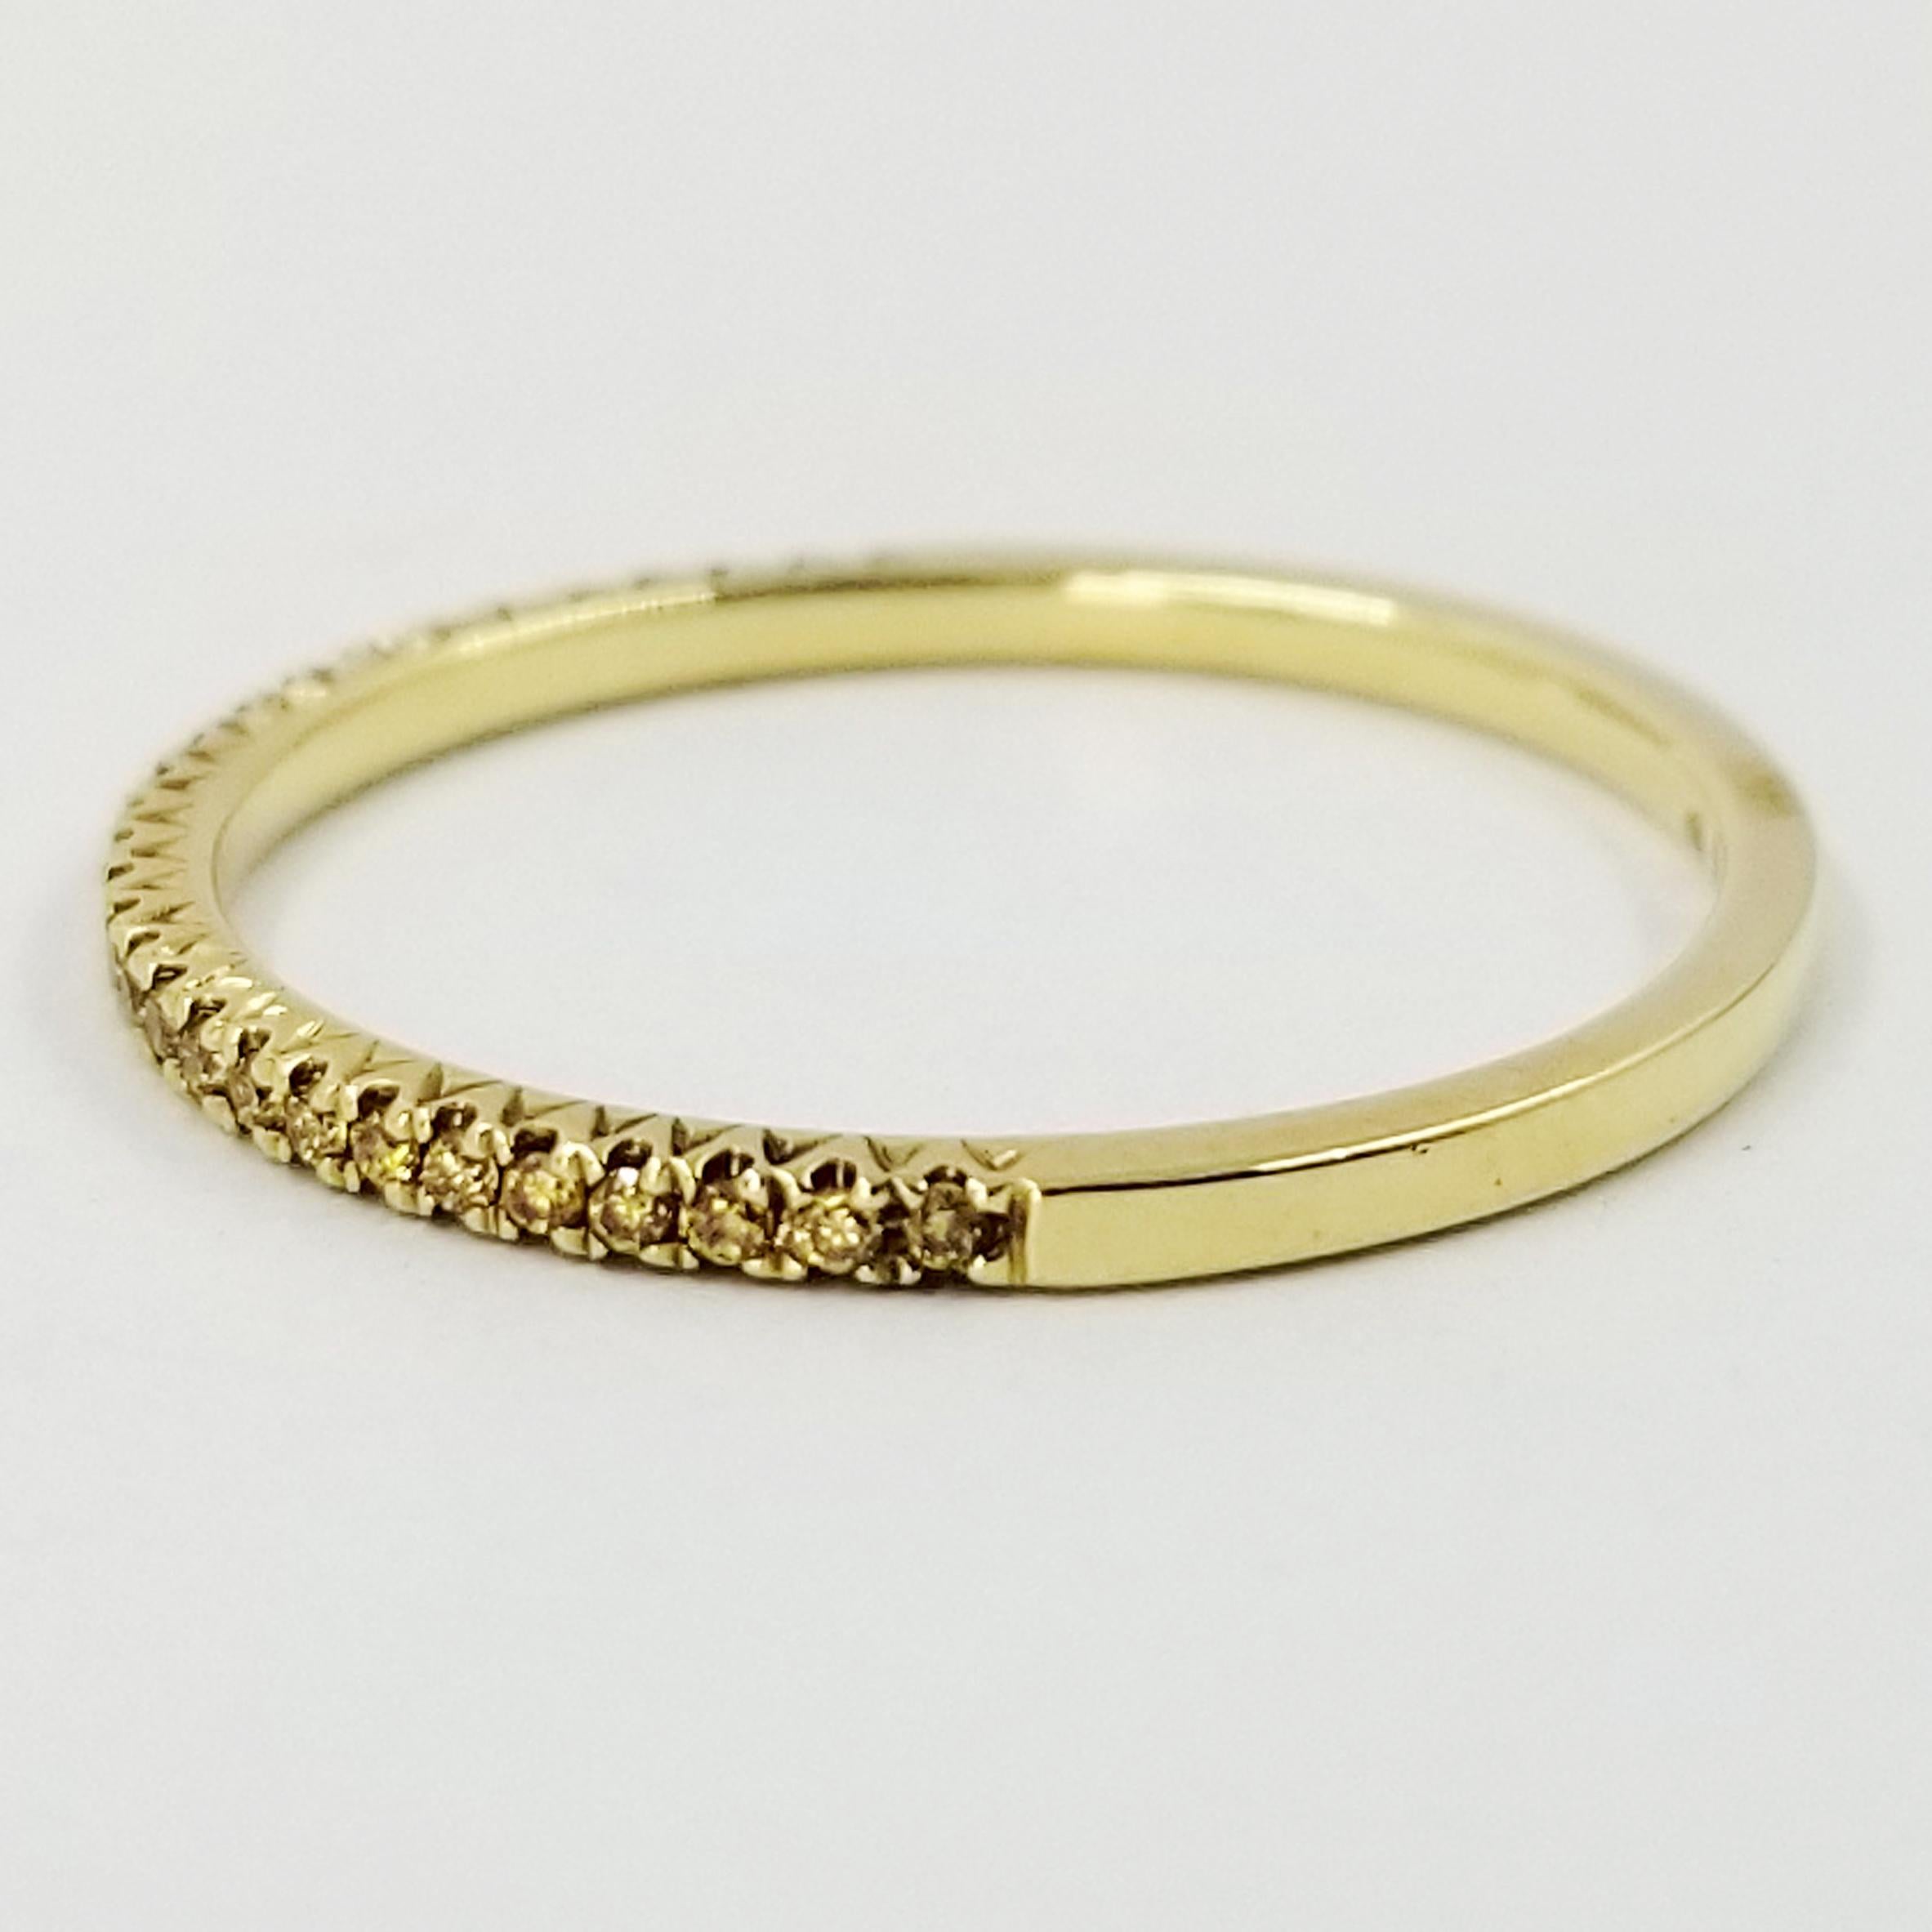 18 Karat Yellow Gold Ring From Hidalgo Featuring 28 Round Yellow Diamonds. Each Diamond Is Set With 4 Prongs, Extending Half Way Around The Ring. Total Diamond Weight is 0.12 Carats. Current Finger Size is 6.5; Purchase Includes One Free Sizing Up